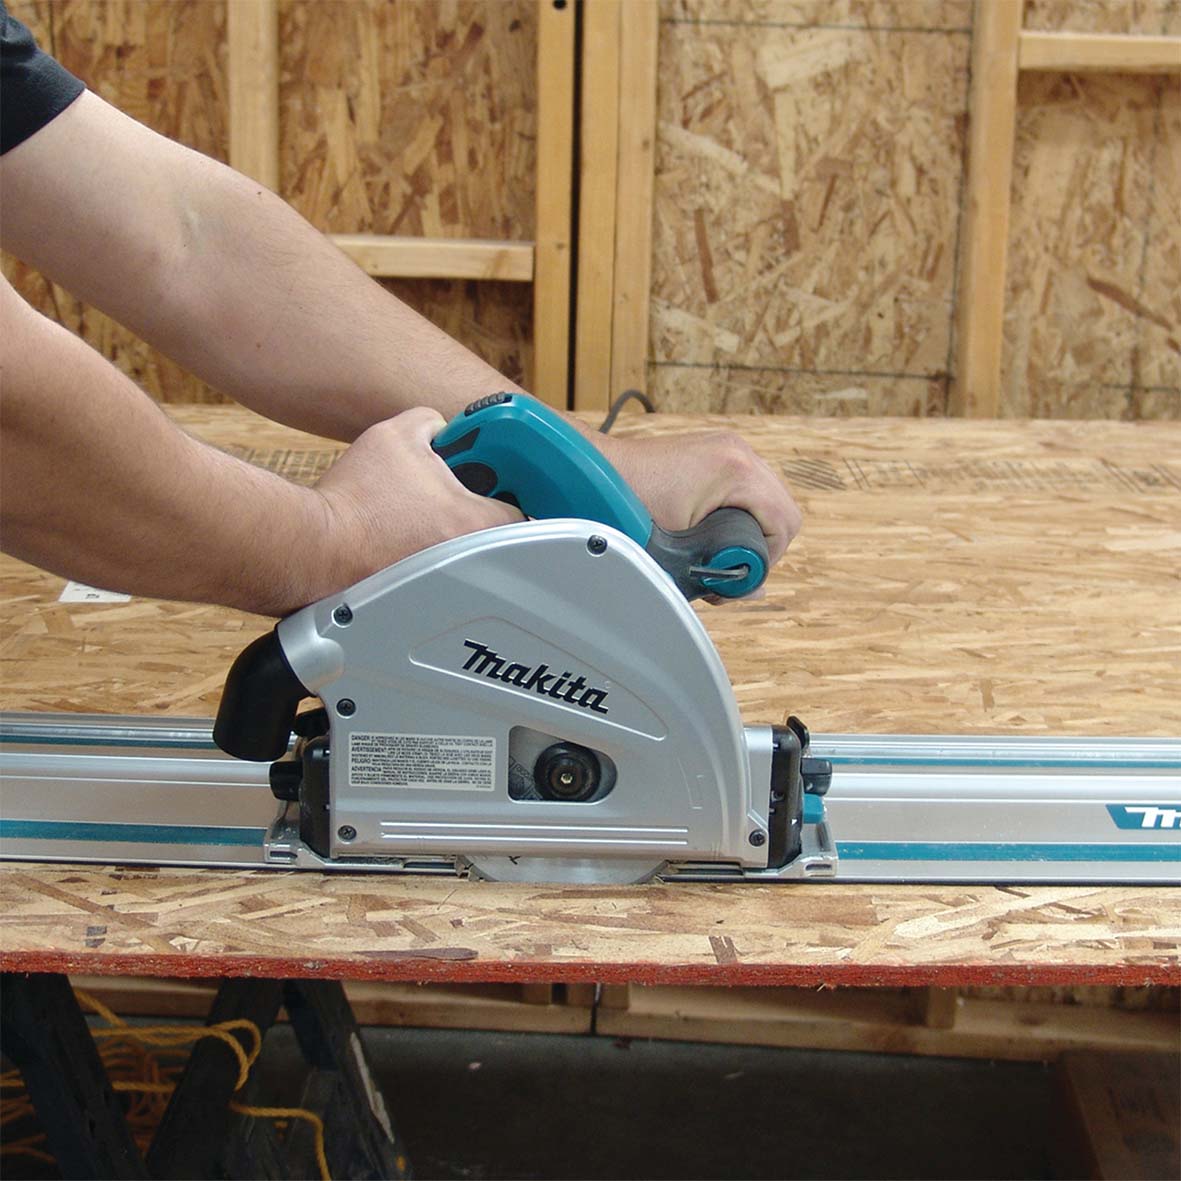 165mm (7") Plunge Cut Circular Saw with Rail SP6000JT by Makita